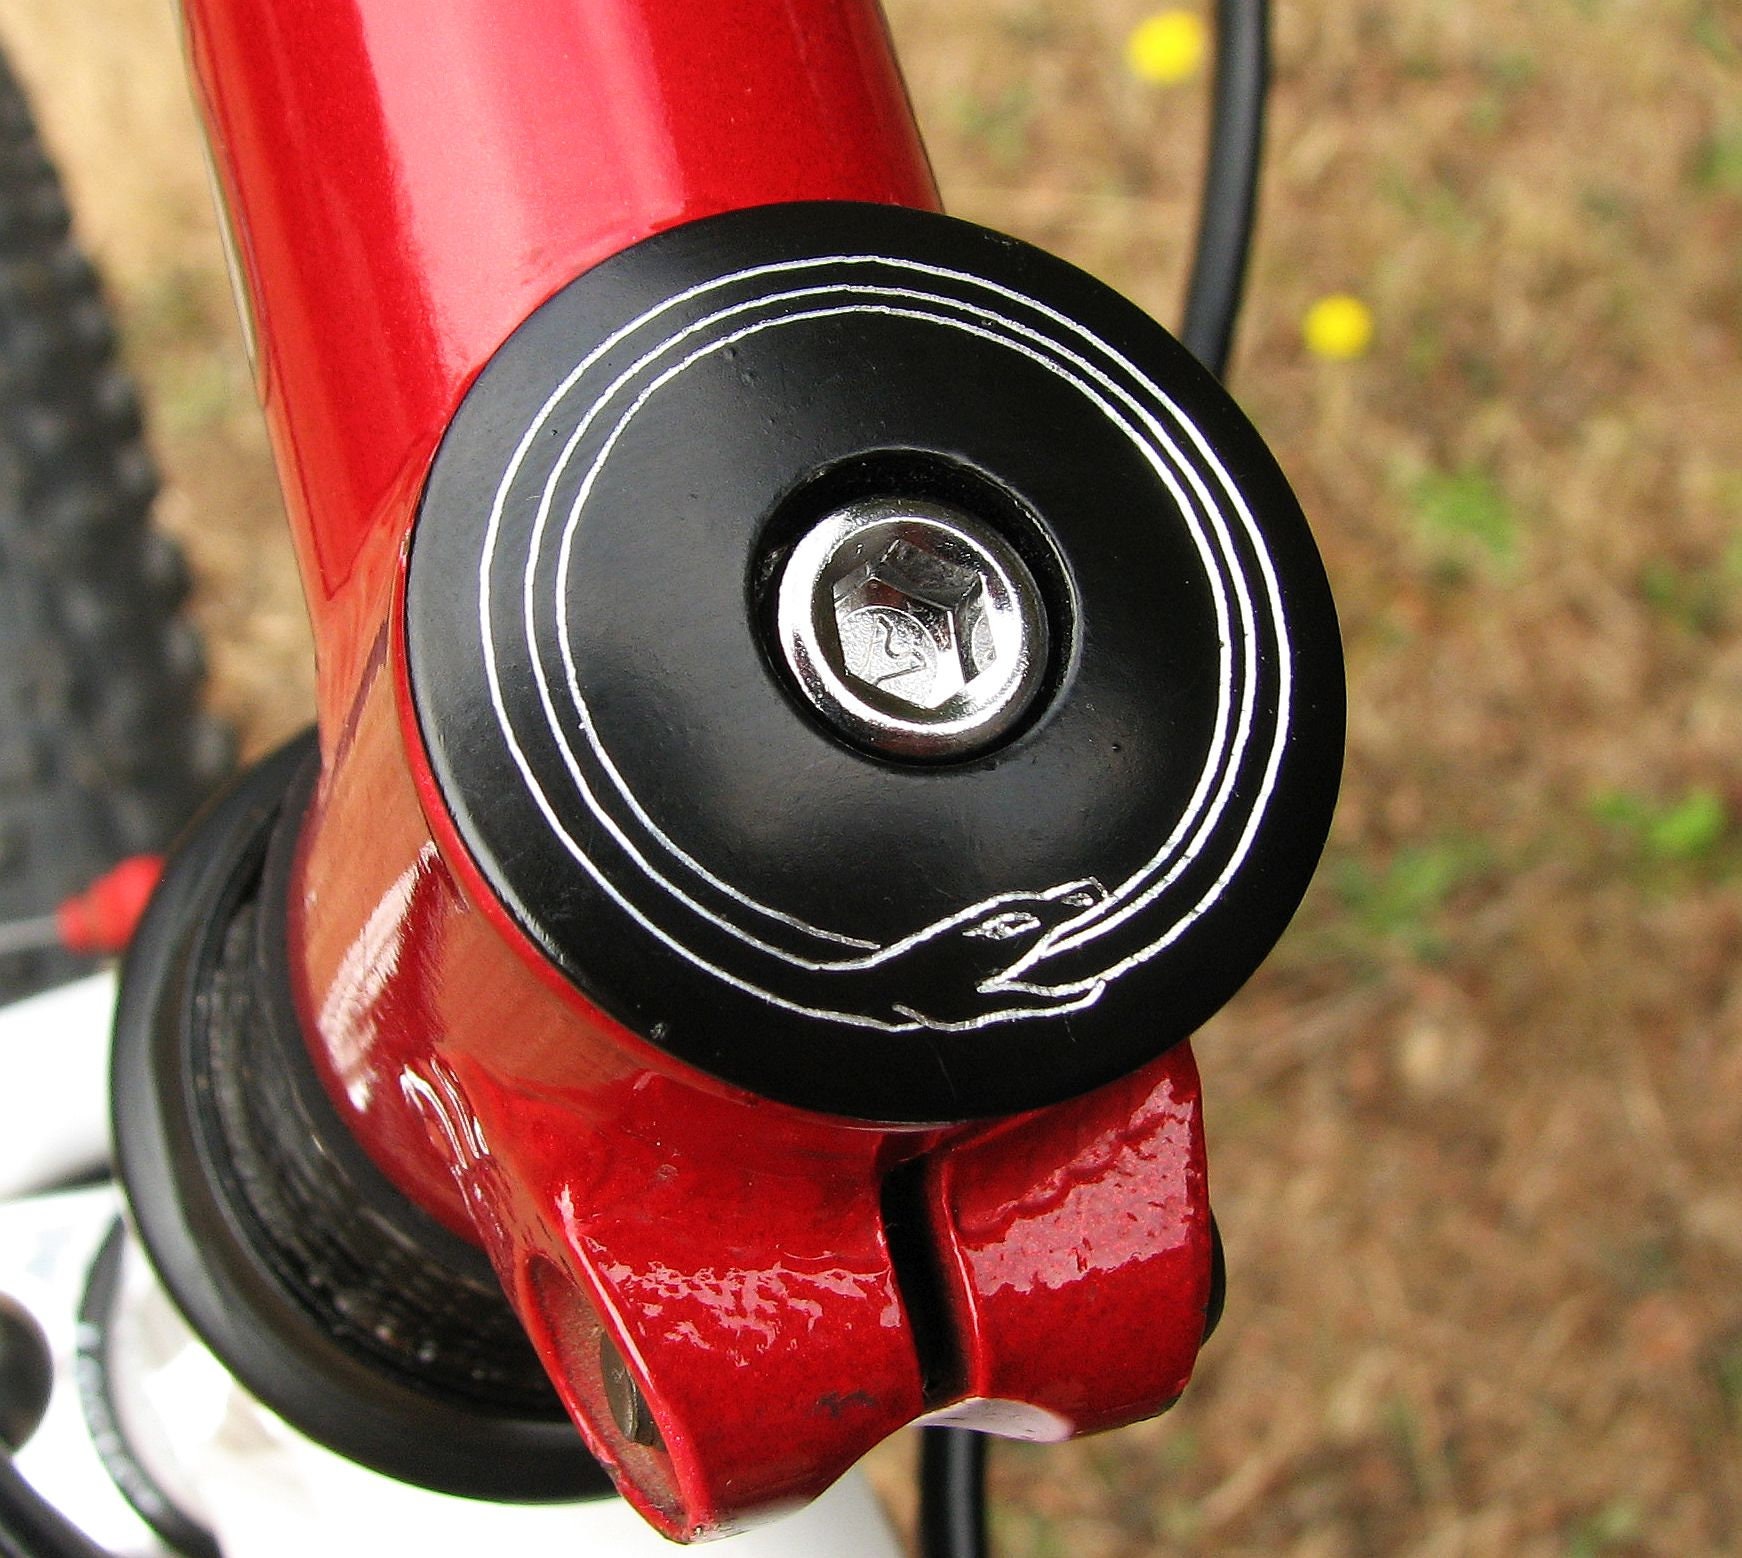 Personalised Date Bike Headset Cap For Cyclists